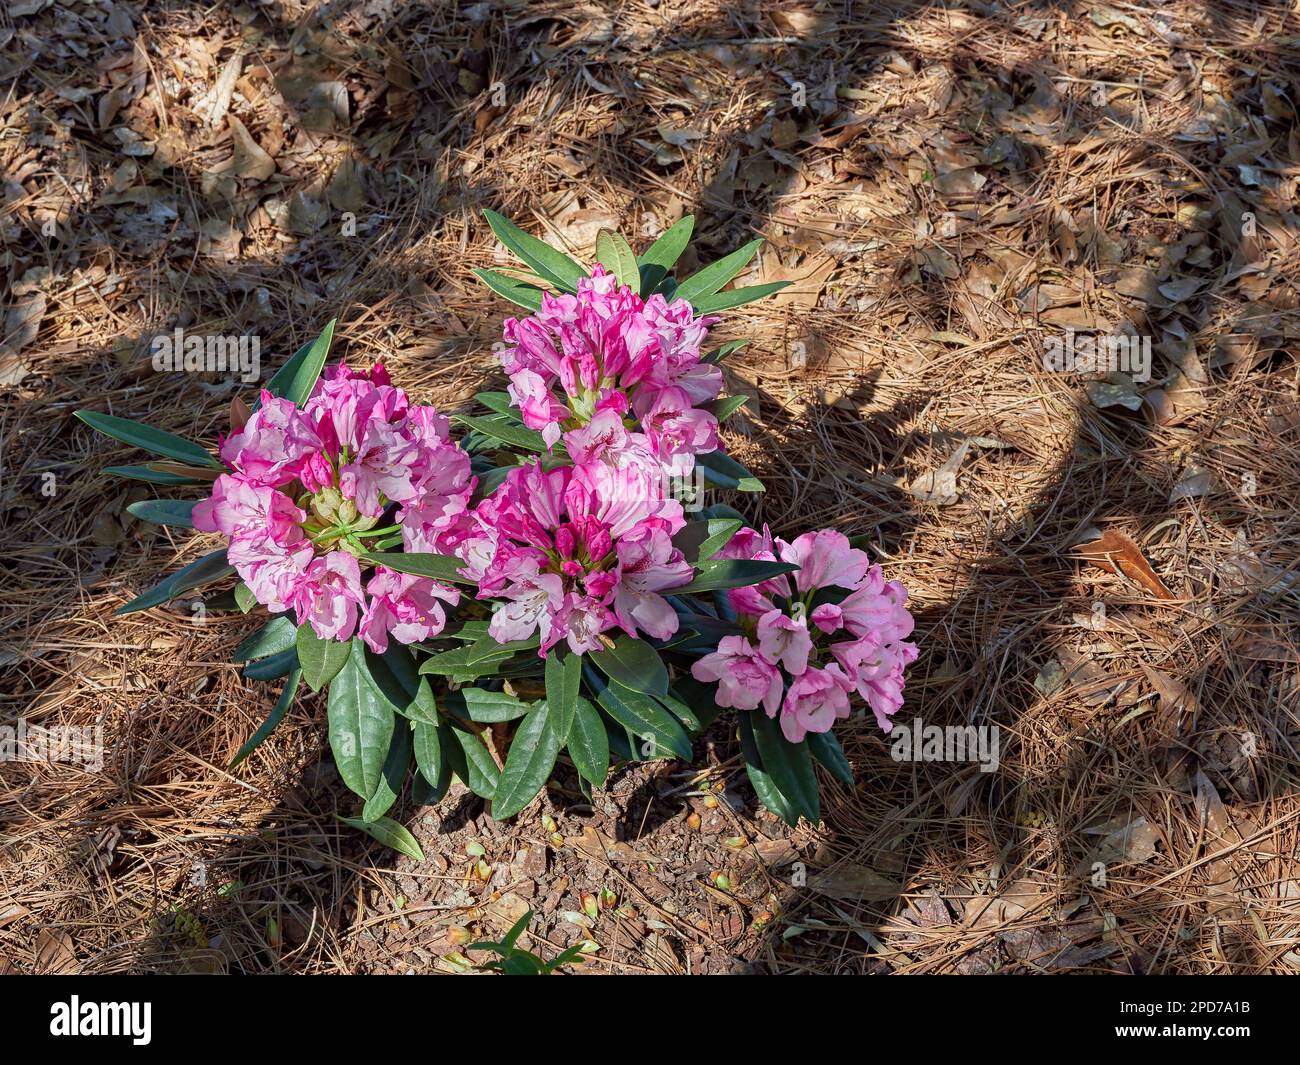 Radiance Southgate Rhododendron plant with pink and white flowers or blooms, flowering or blooming in spring in Alabama, USA. Stock Photo